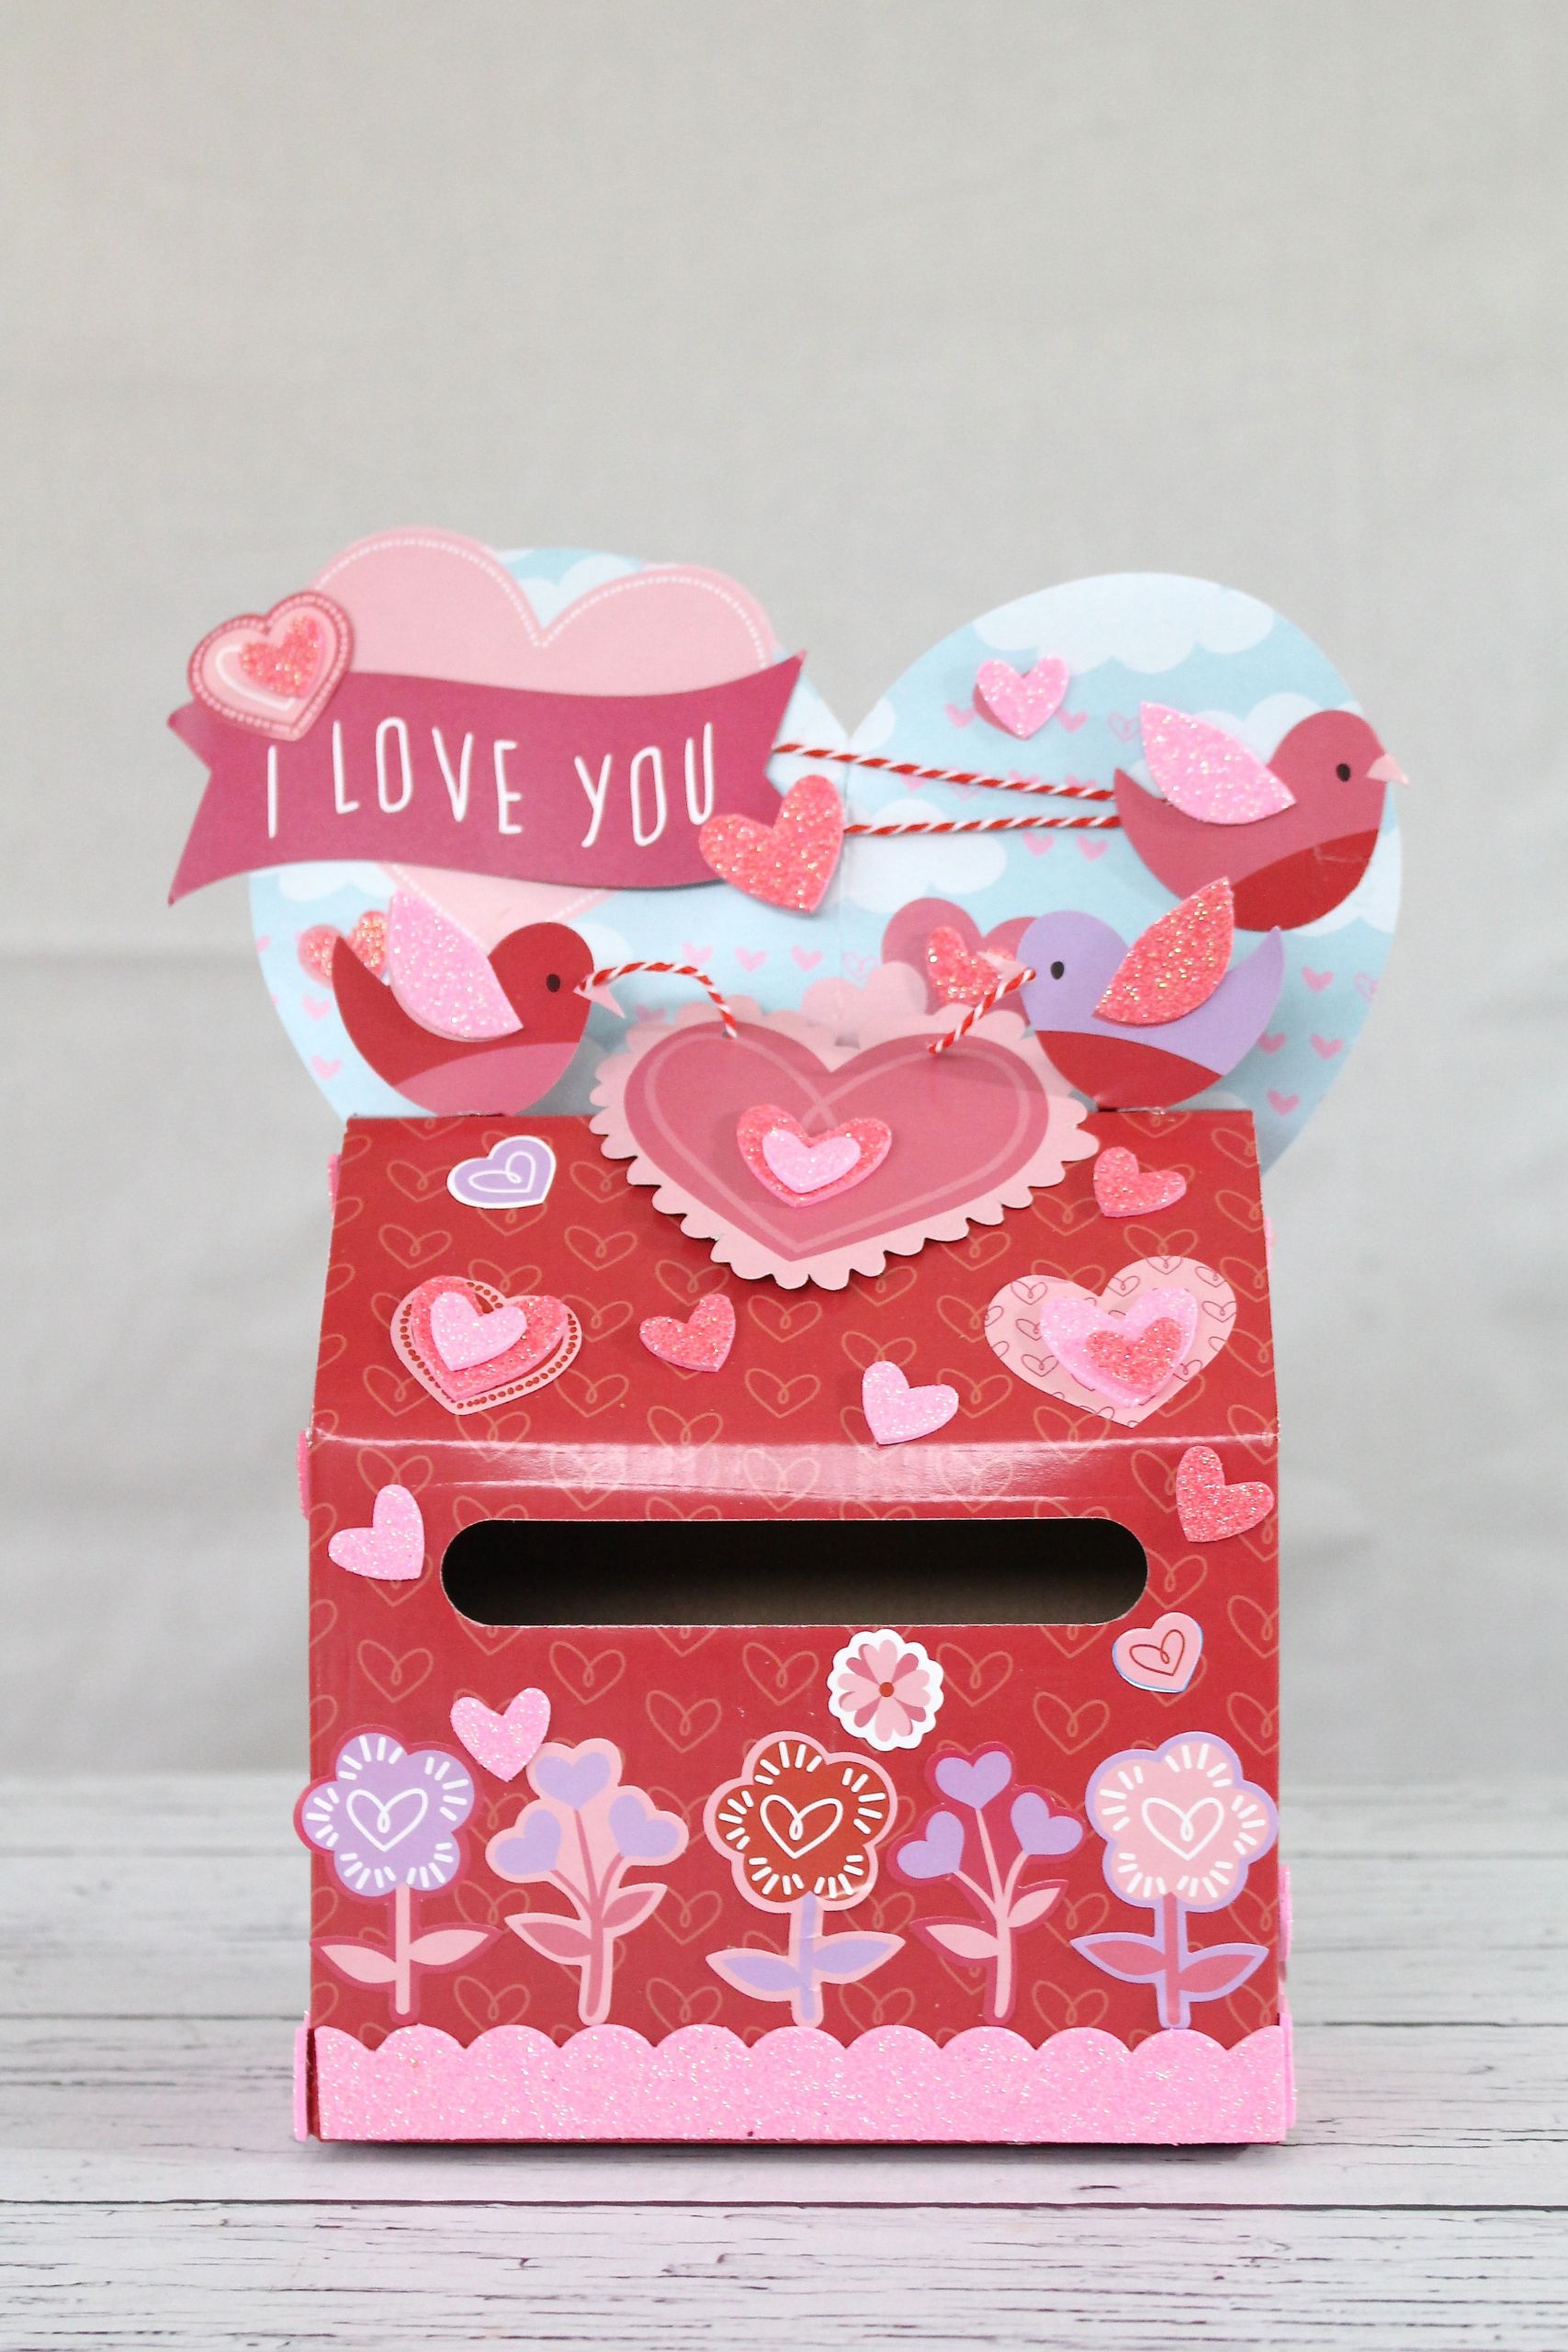 Gift Ideas For First Valentine'S Day
 DIY Valentine s Day Ideas for Kids